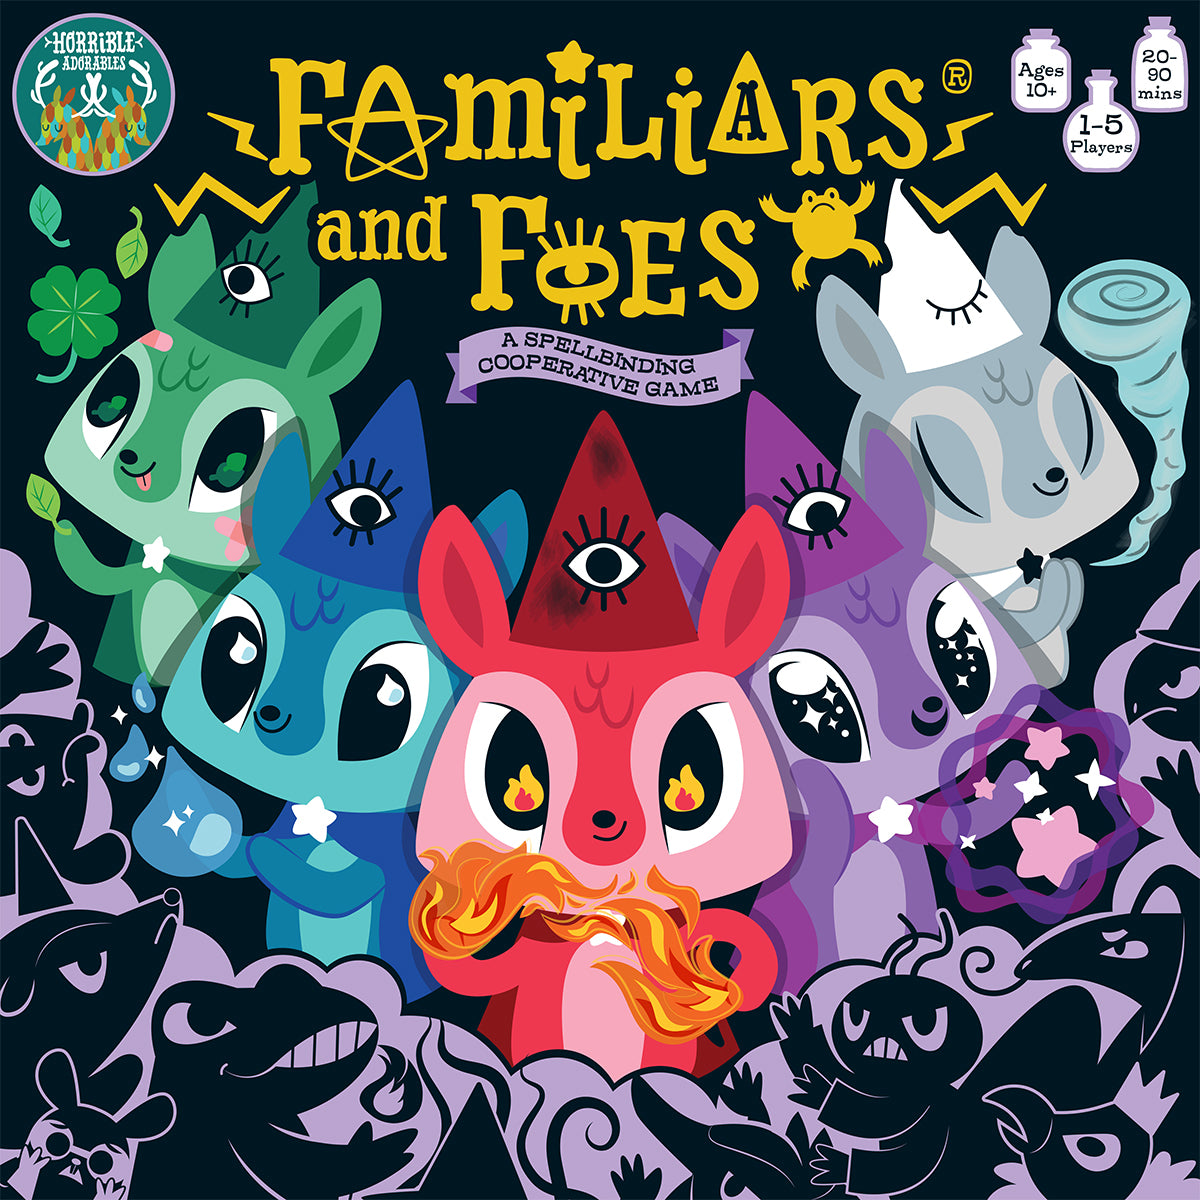 Horrible Adorables Familiars and Foes: A Spellbinding Cooperative Board Game - Box Cover